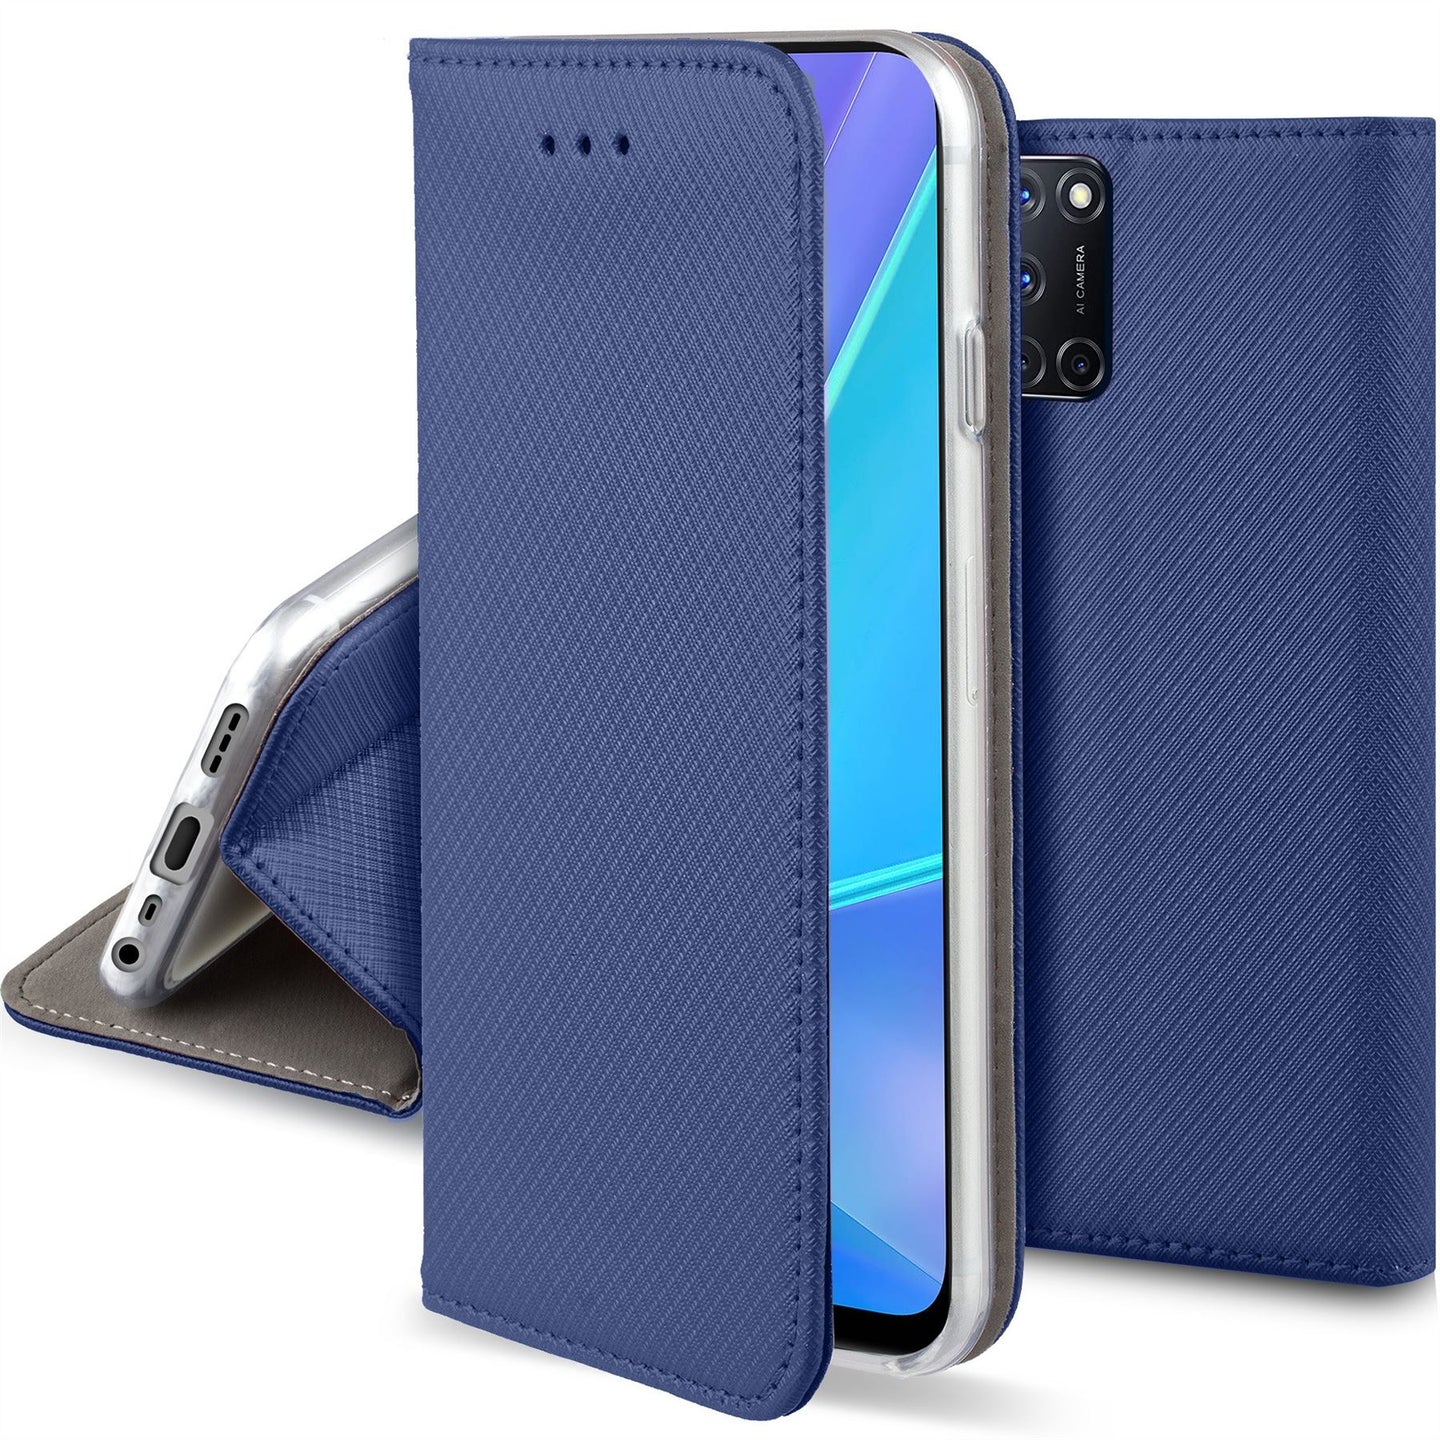 Moozy Case Flip Cover for Oppo A72, Oppo A52 and Oppo A92, Dark Blue - Smart Magnetic Flip Case with Card Holder and Stand